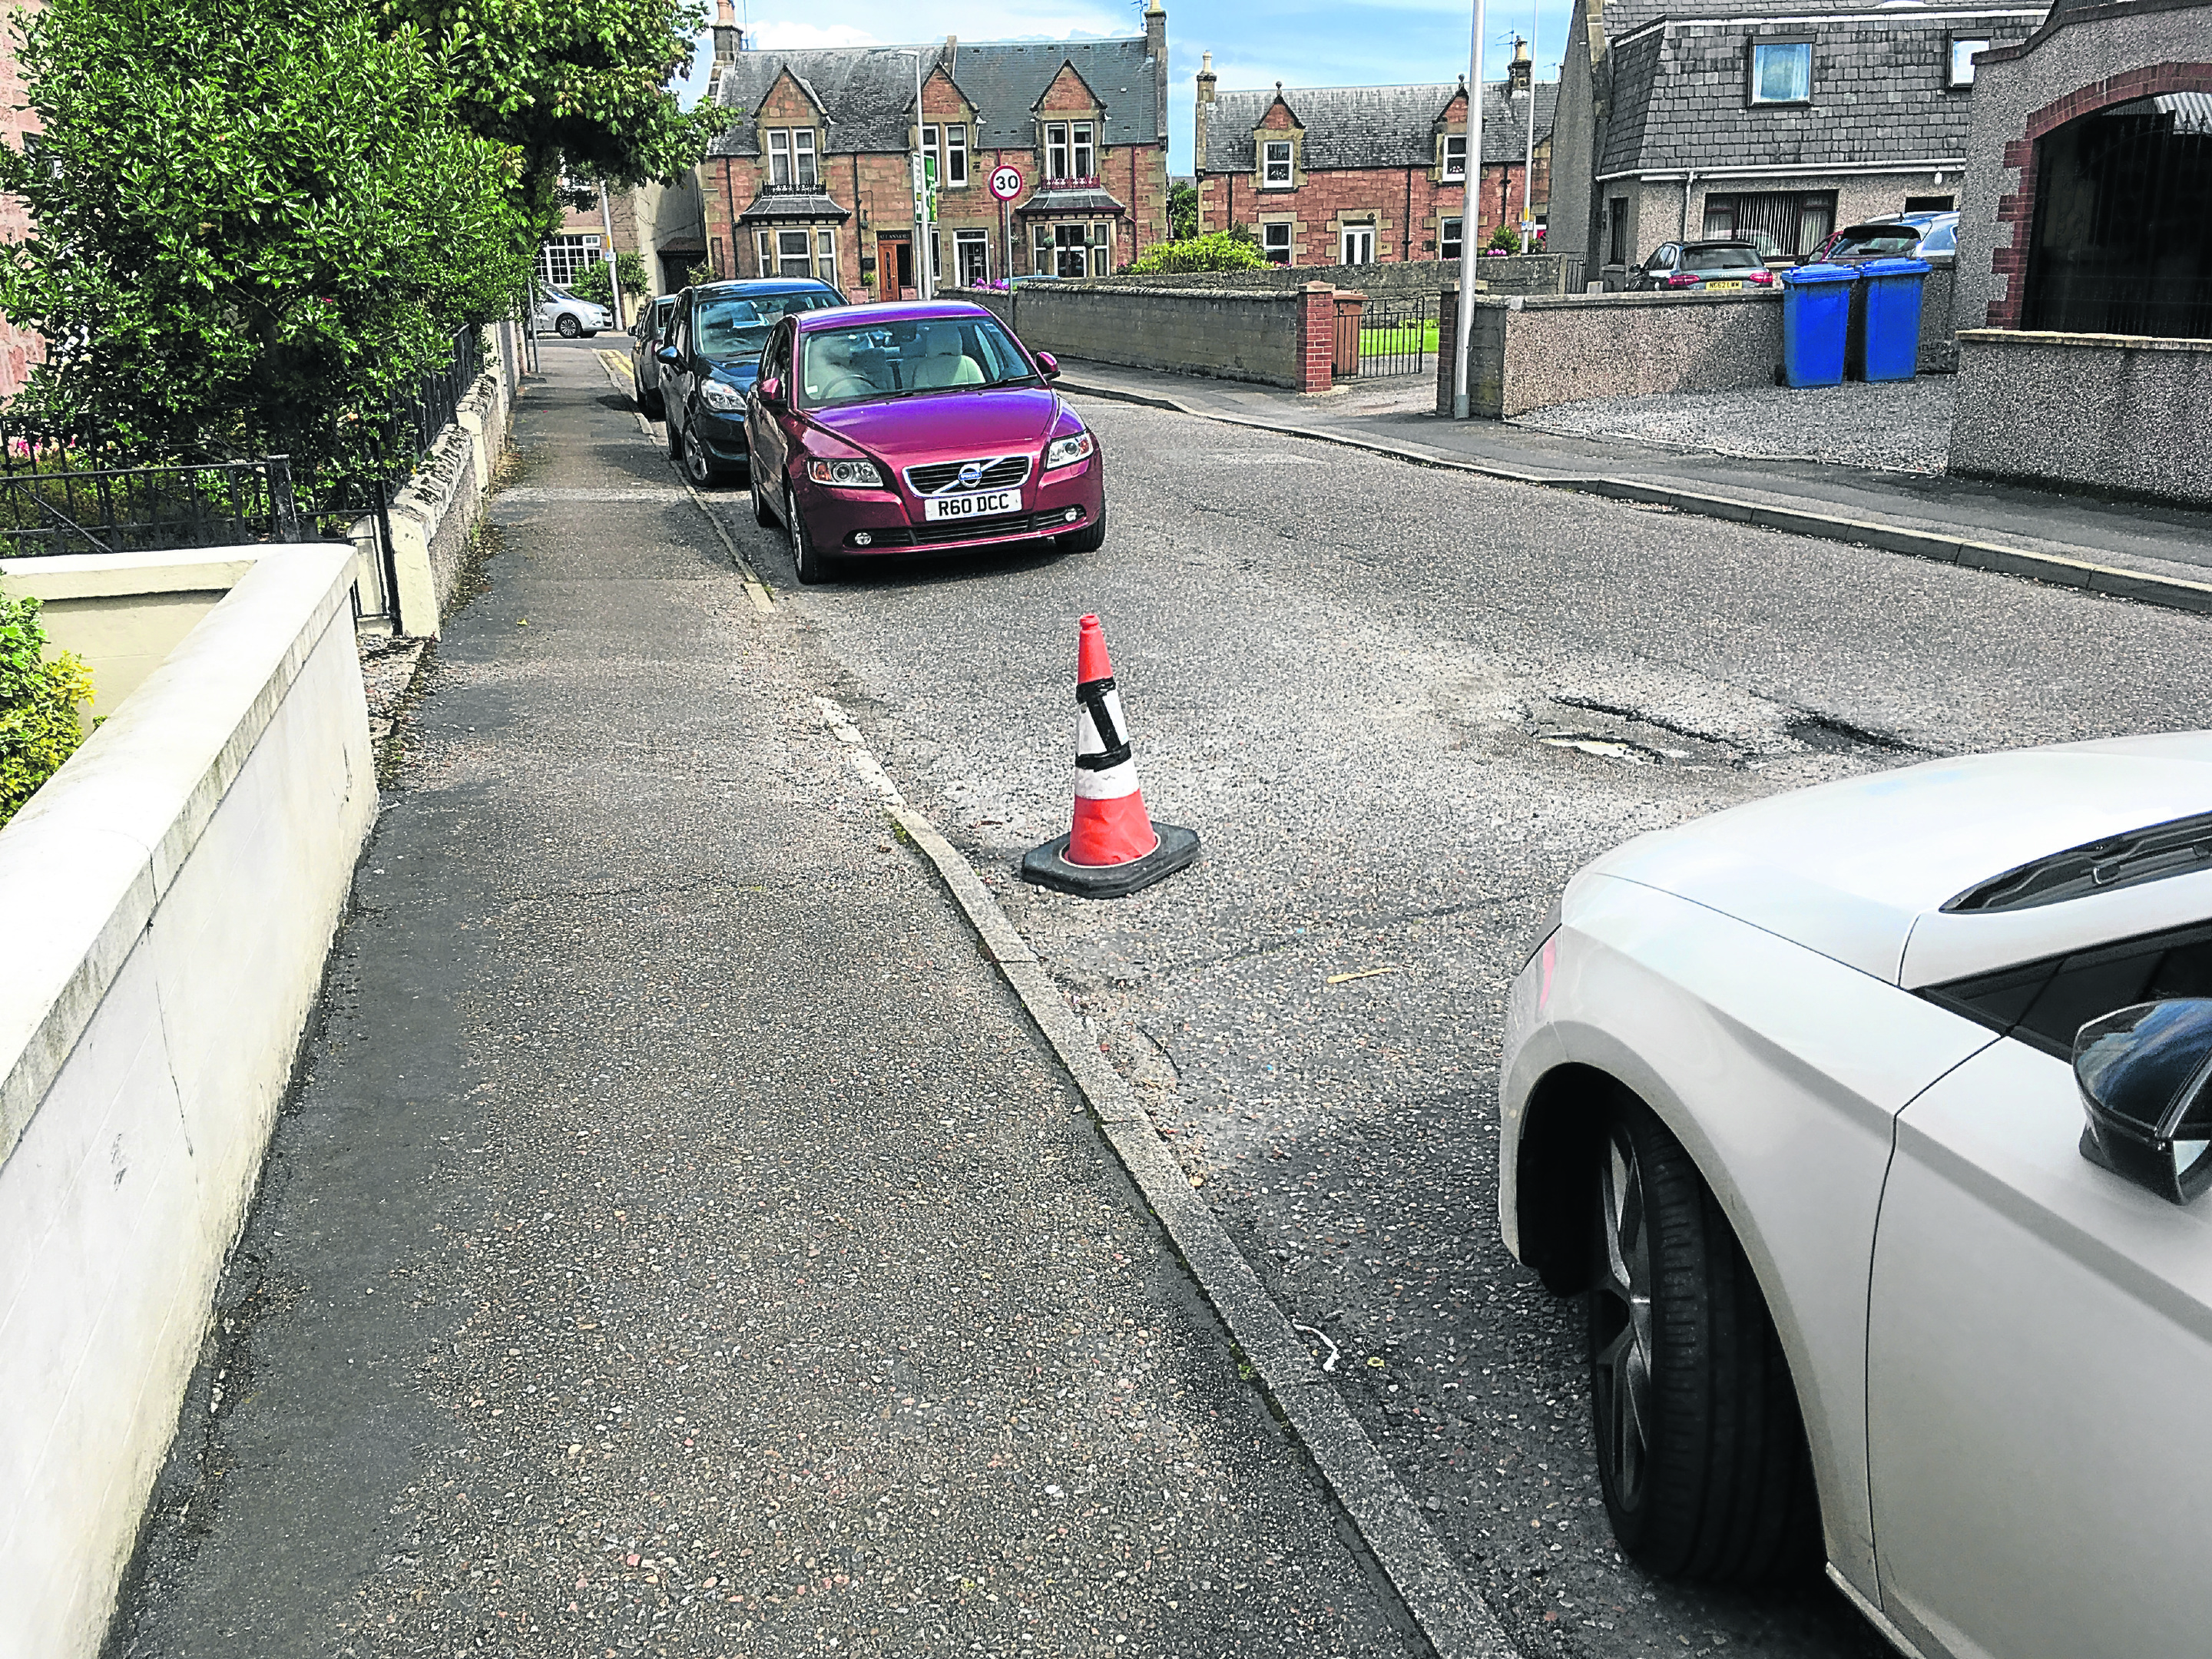 Traffic cones put on an Inverness street by residents to stop others parking there